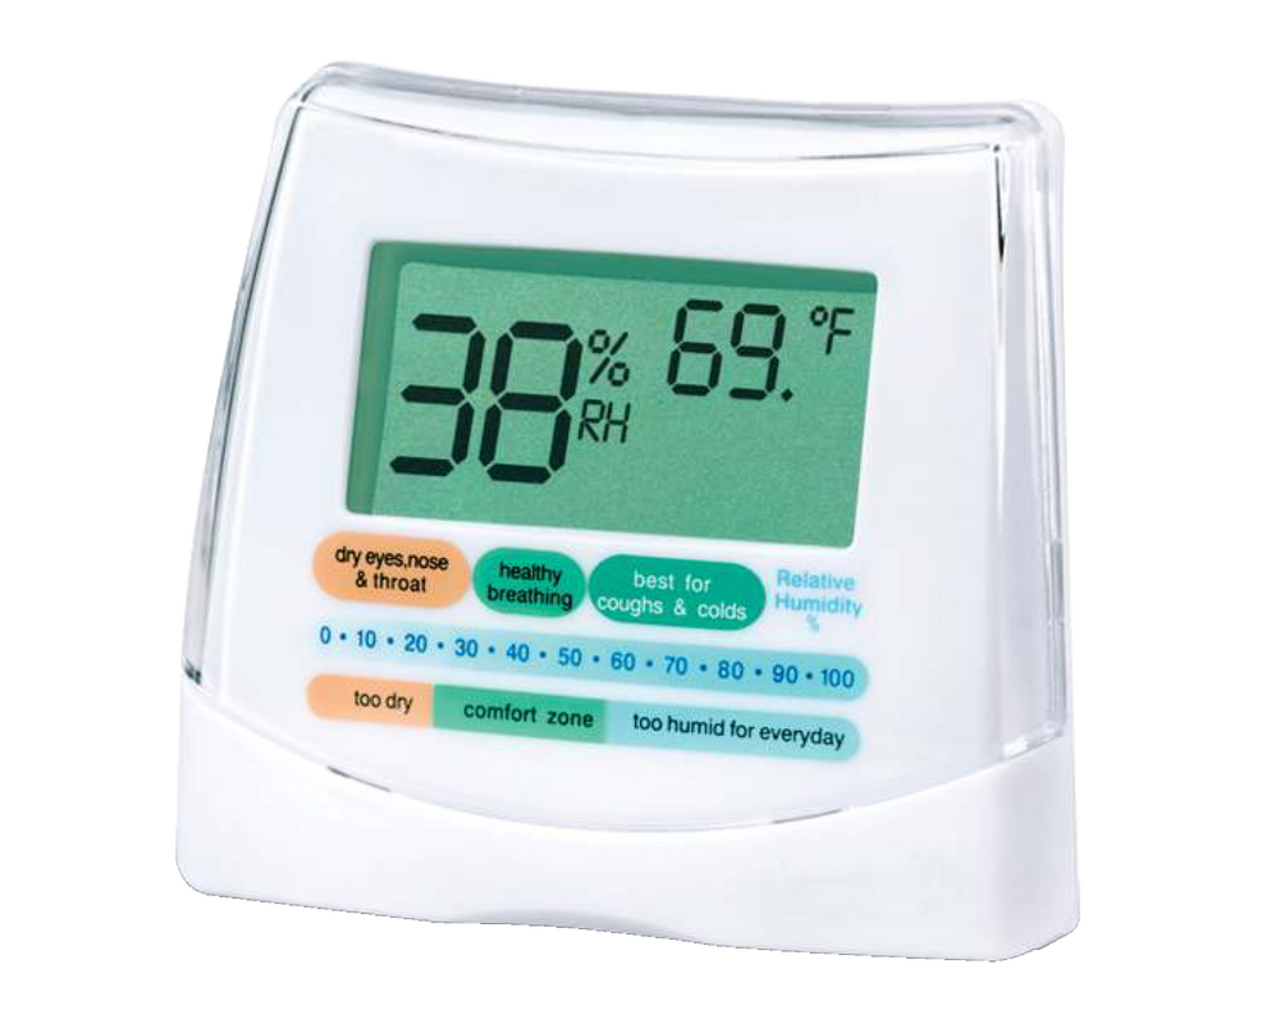 https://media-www.canadiantire.ca/product/fixing/home-environment/home-air-quality-accessories/0435203/hygrometer-c02518f8-0e02-4b9a-b639-64f621c38ffd.png?imdensity=1&imwidth=640&impolicy=mZoom